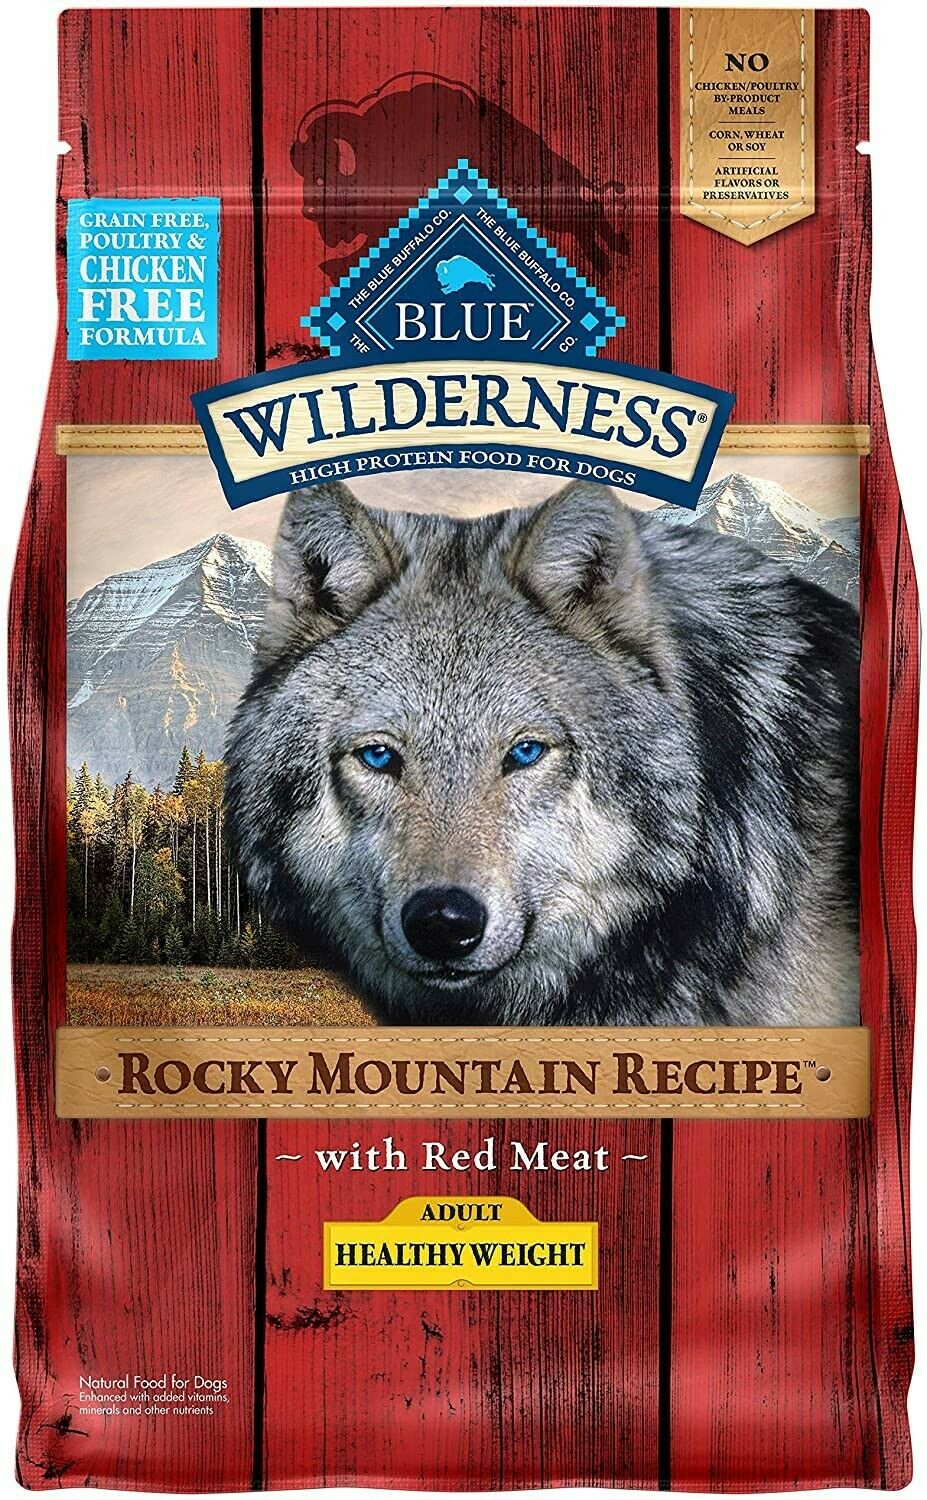 Blue Buffalo Wilderness Rocky Mountain Weight Adult Red Meat Dog Food, 22 Lbs.